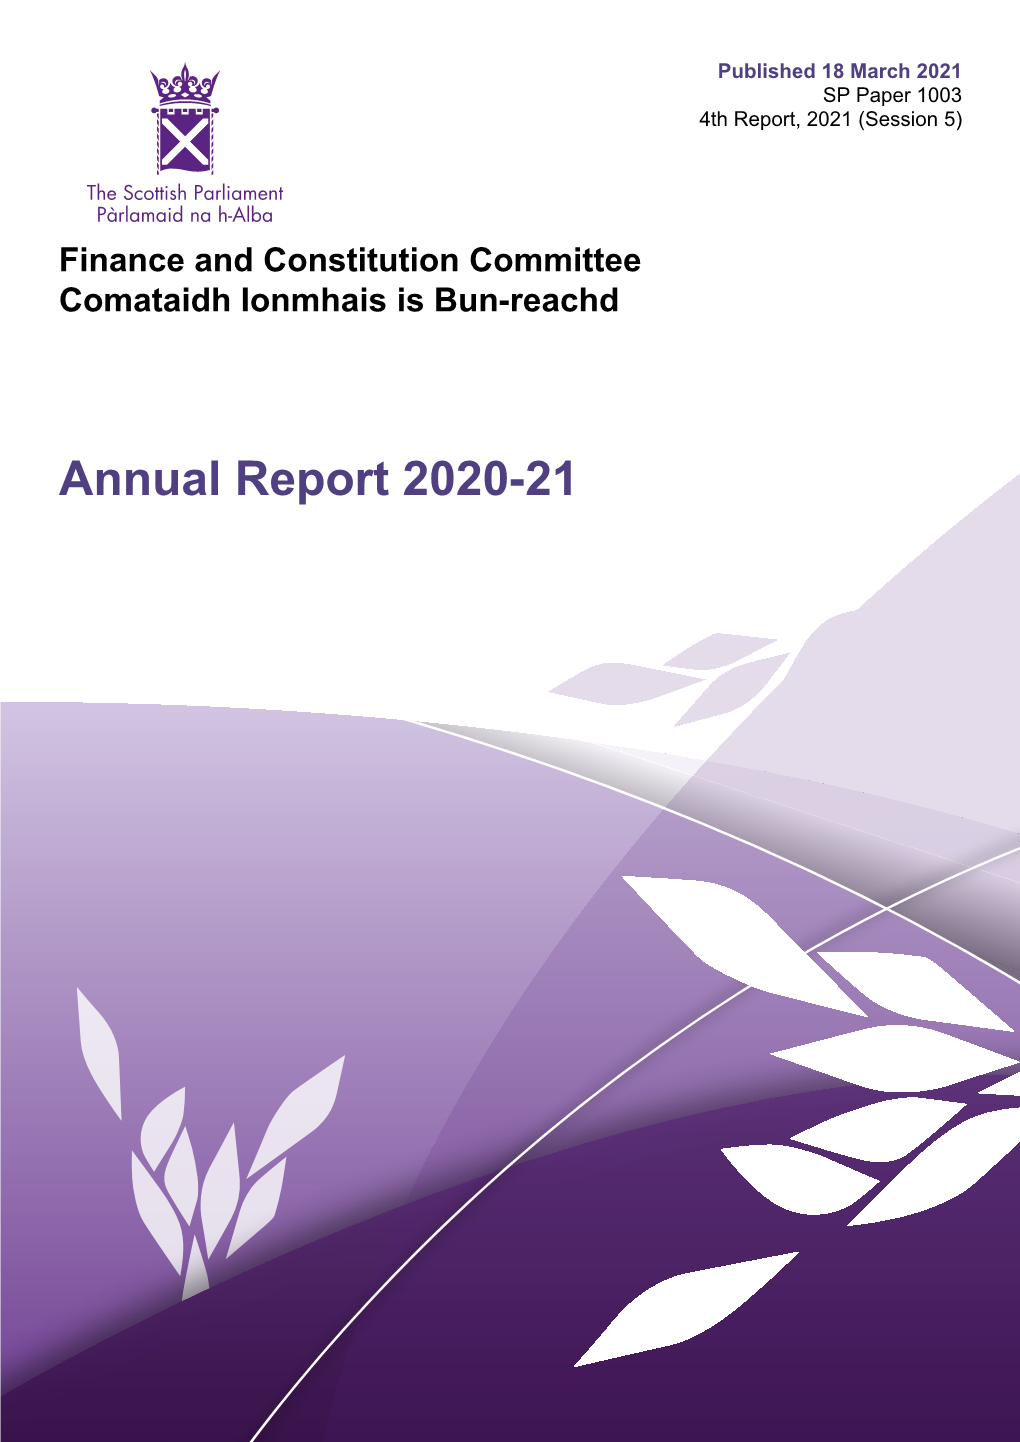 Annual Report 2020-21 Published in Scotland by the Scottish Parliamentary Corporate Body